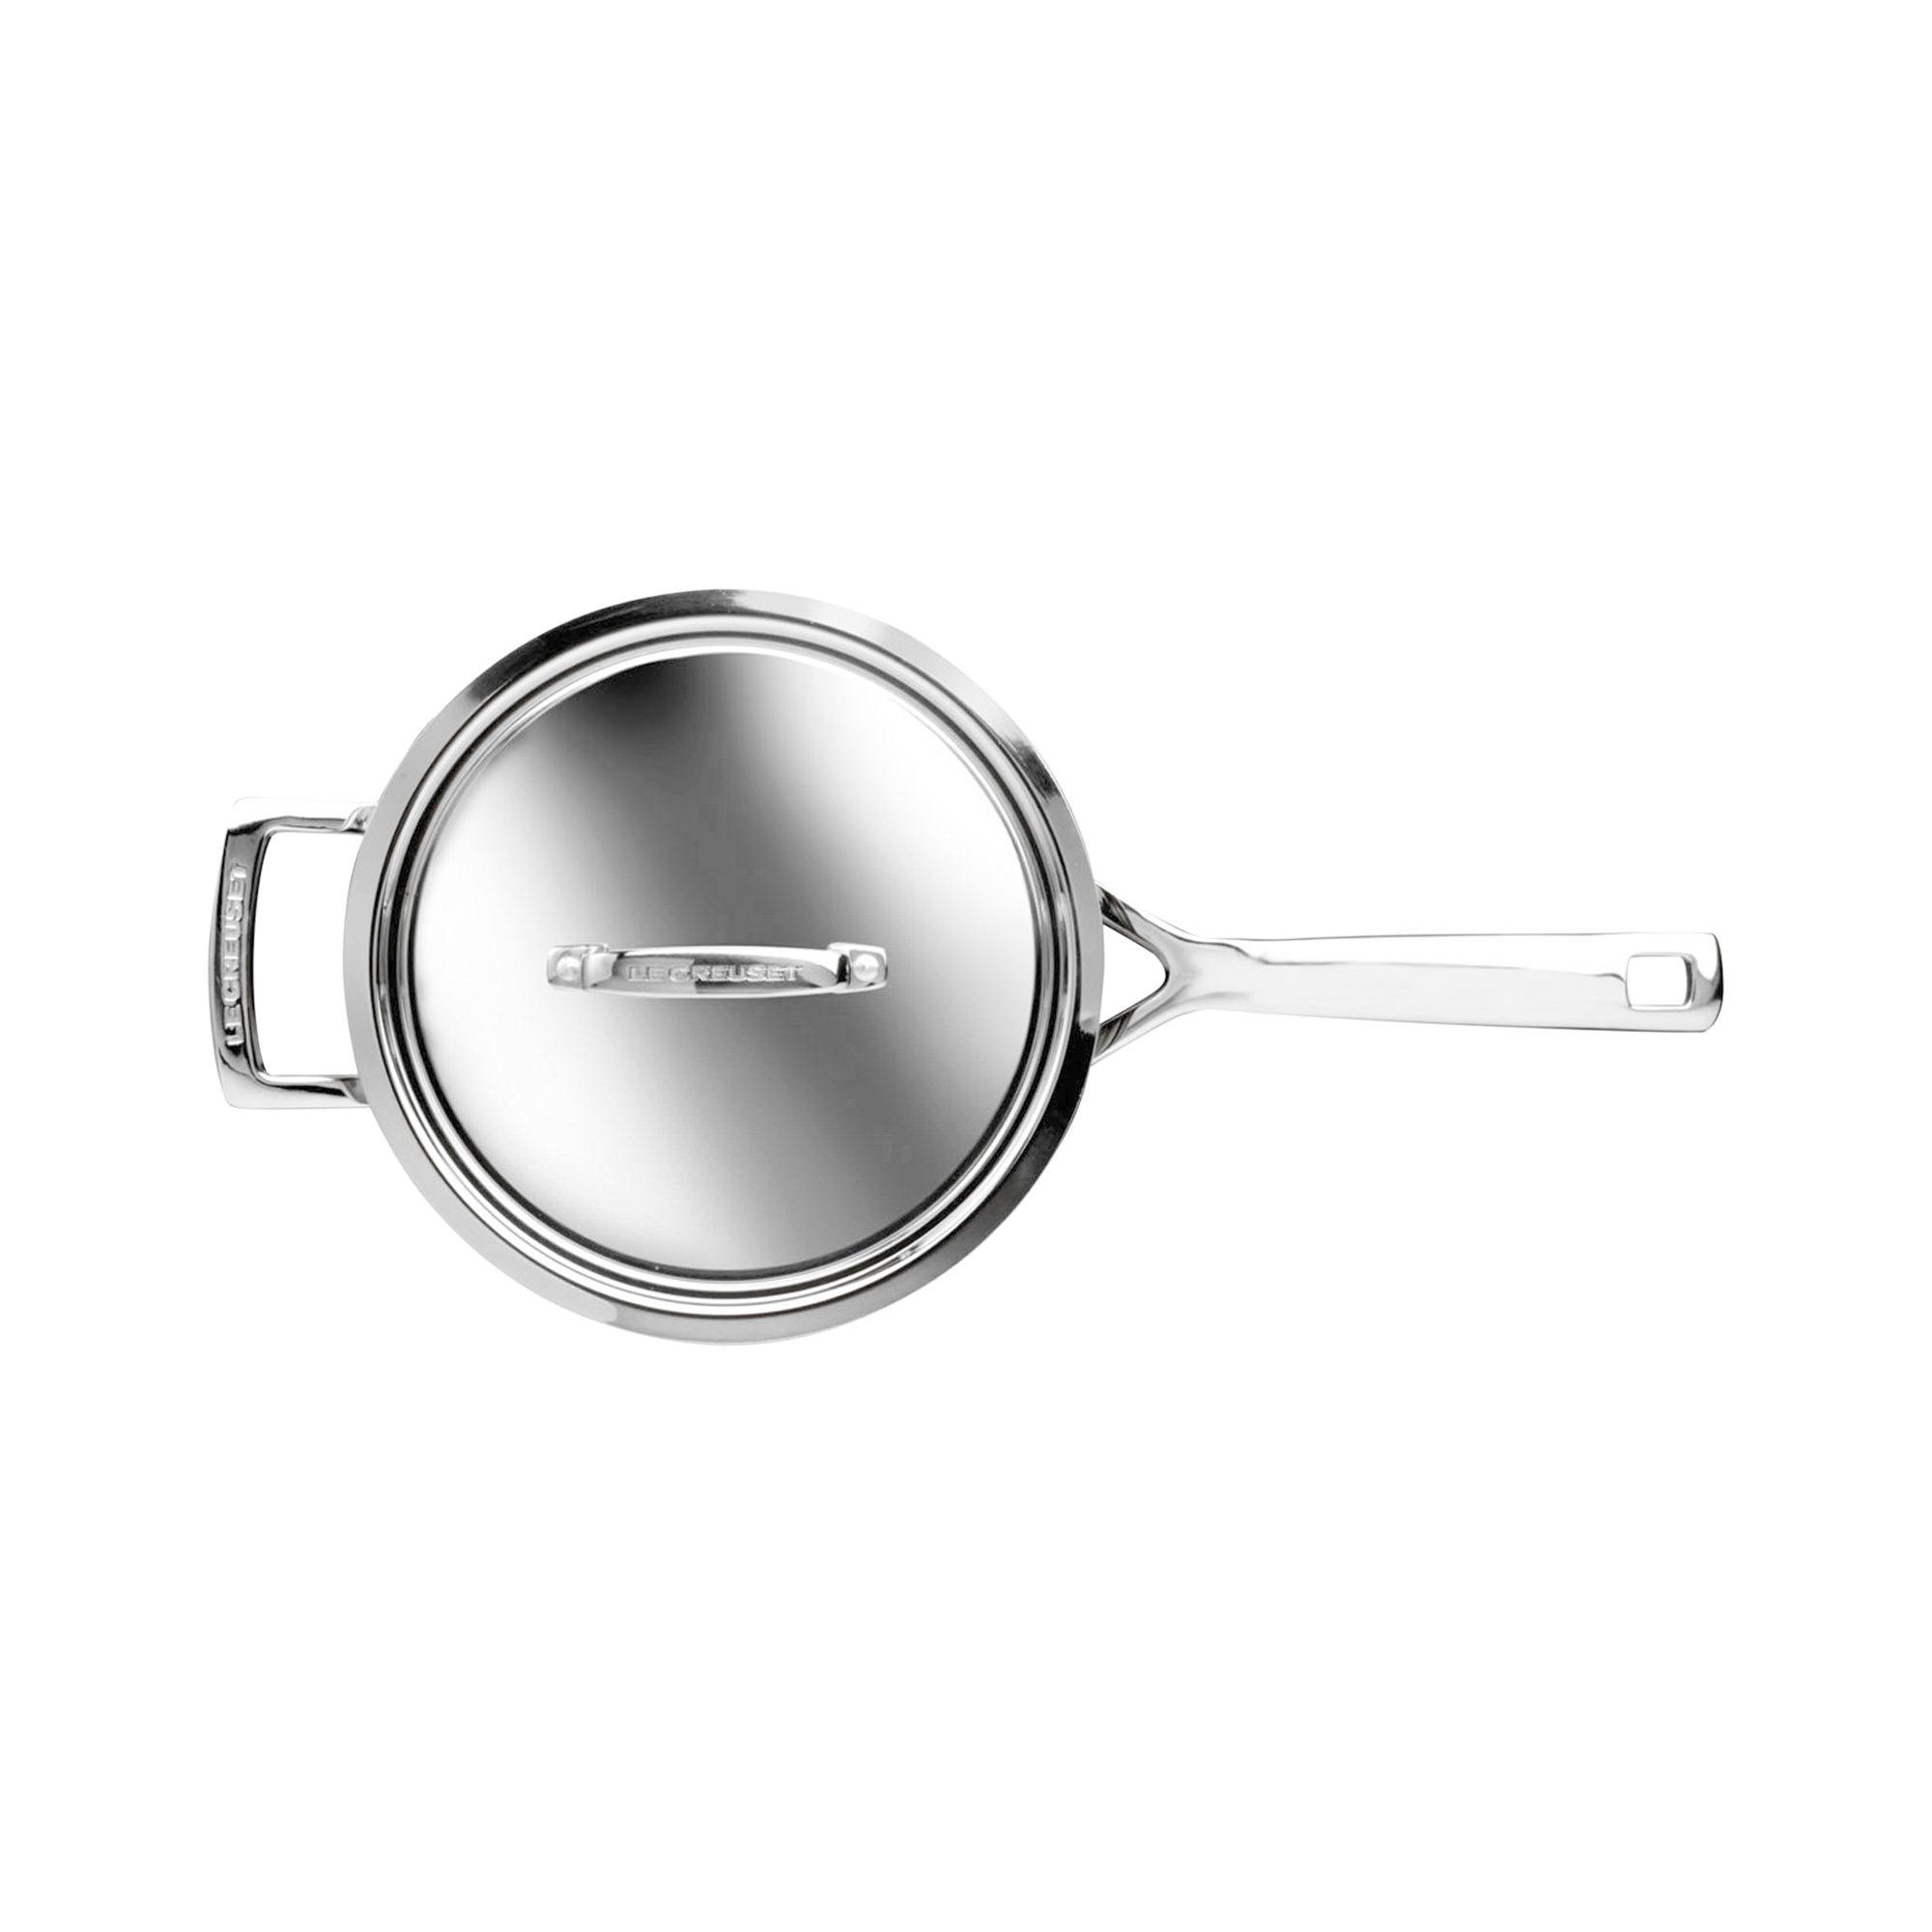 Le Creuset 3-Ply Stainless Steel Saucepan with Lid 18cm - 2.8L Image 2